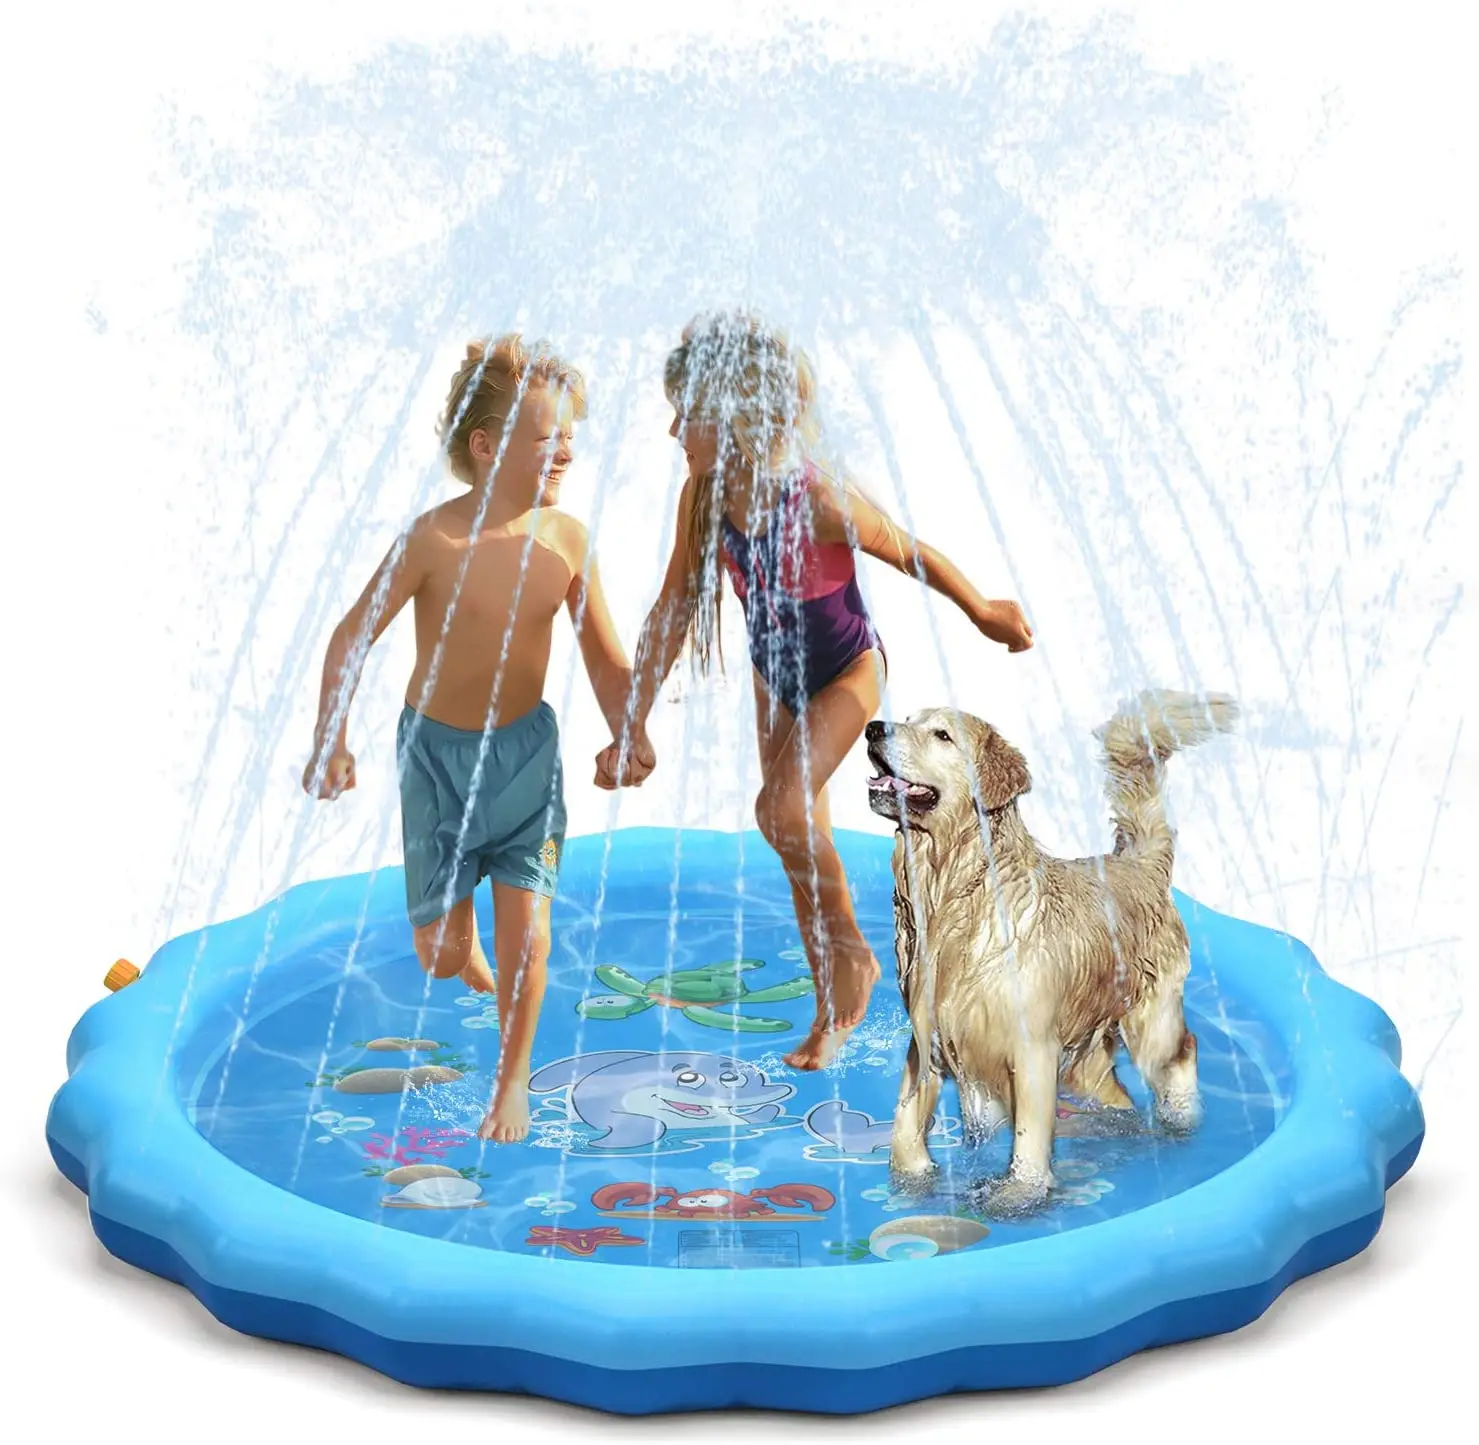 

100cm Pet Play Water Spray Splash Mat Inflatable Sprinkler Cushion Pads Outdoor Garden Fountain Toy Tub Swiming Pool for Kid Dog